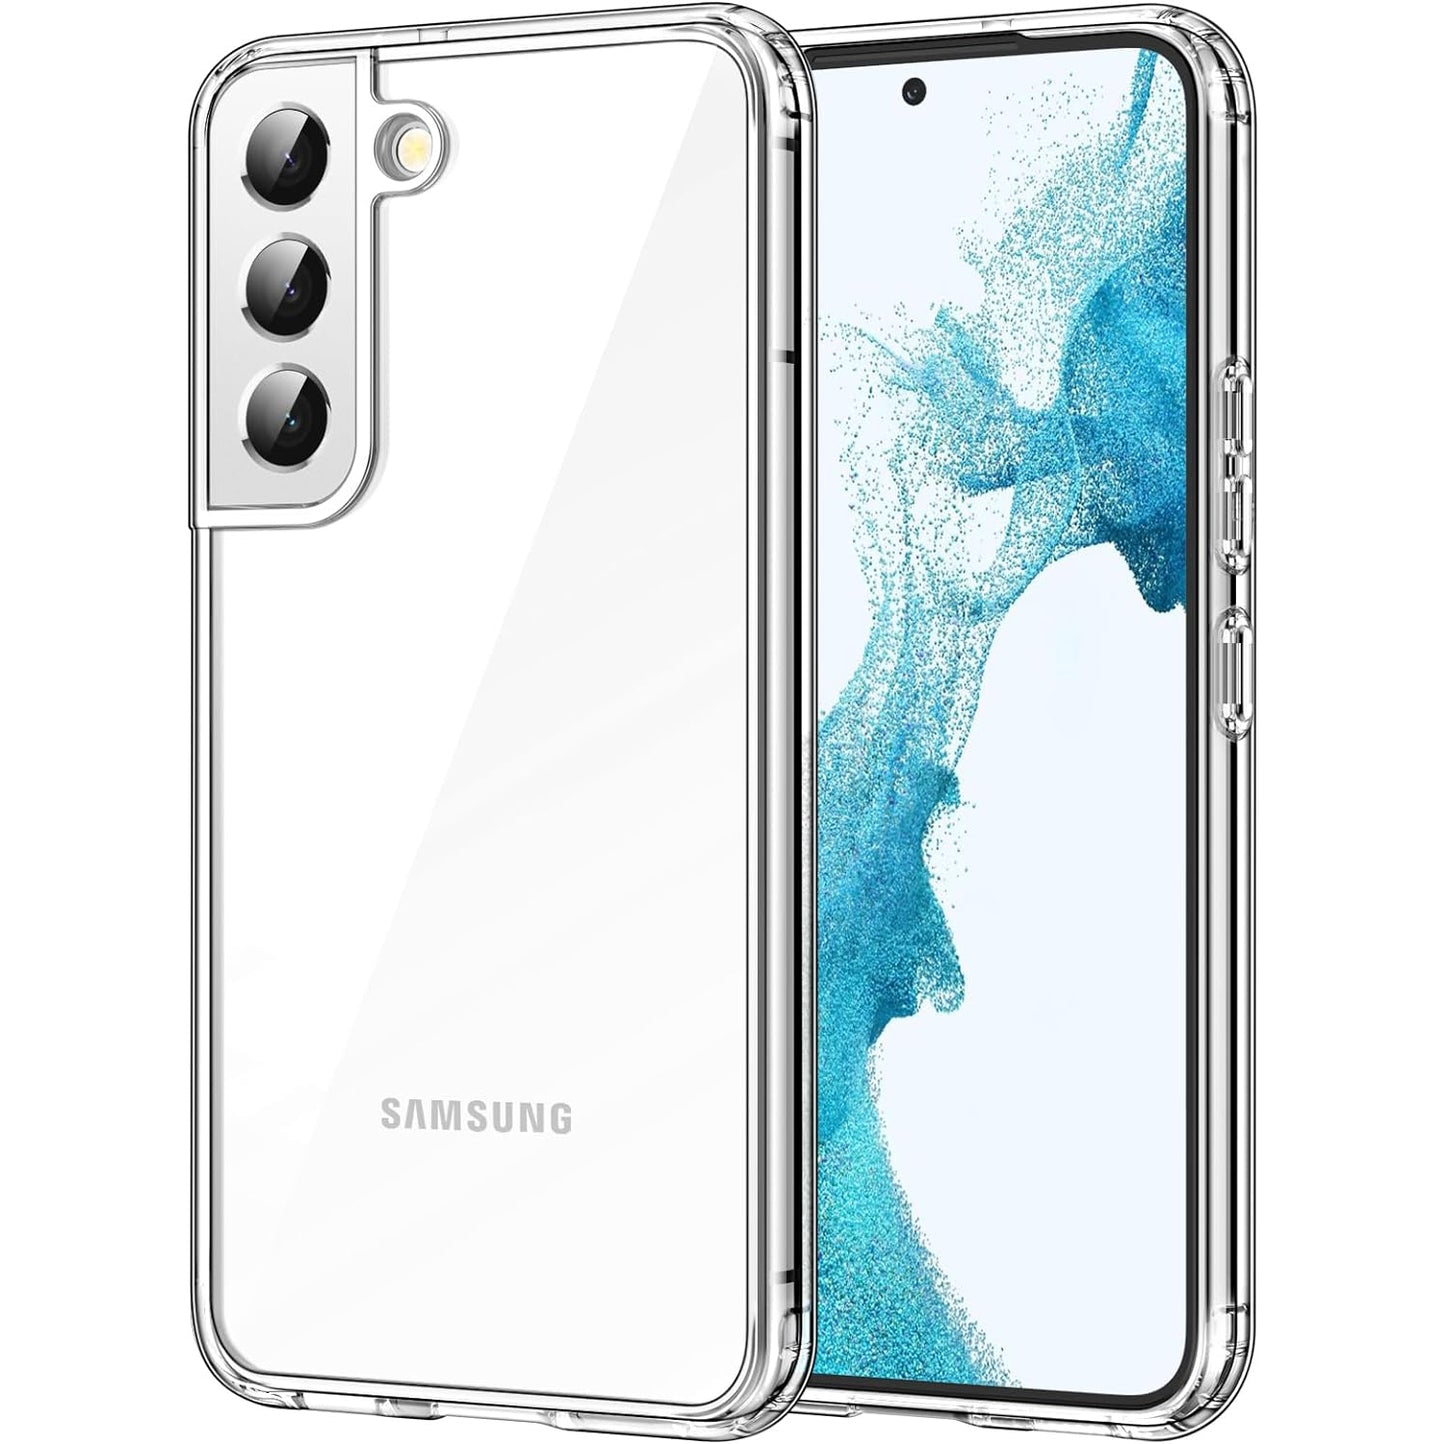 Fashionarie Club Cover Case for Samsungg S20, S21, S22, S23 Plus Ultra Cover Case Soft Silicon Transparent Cover Shockproof Protective Bumper Corners